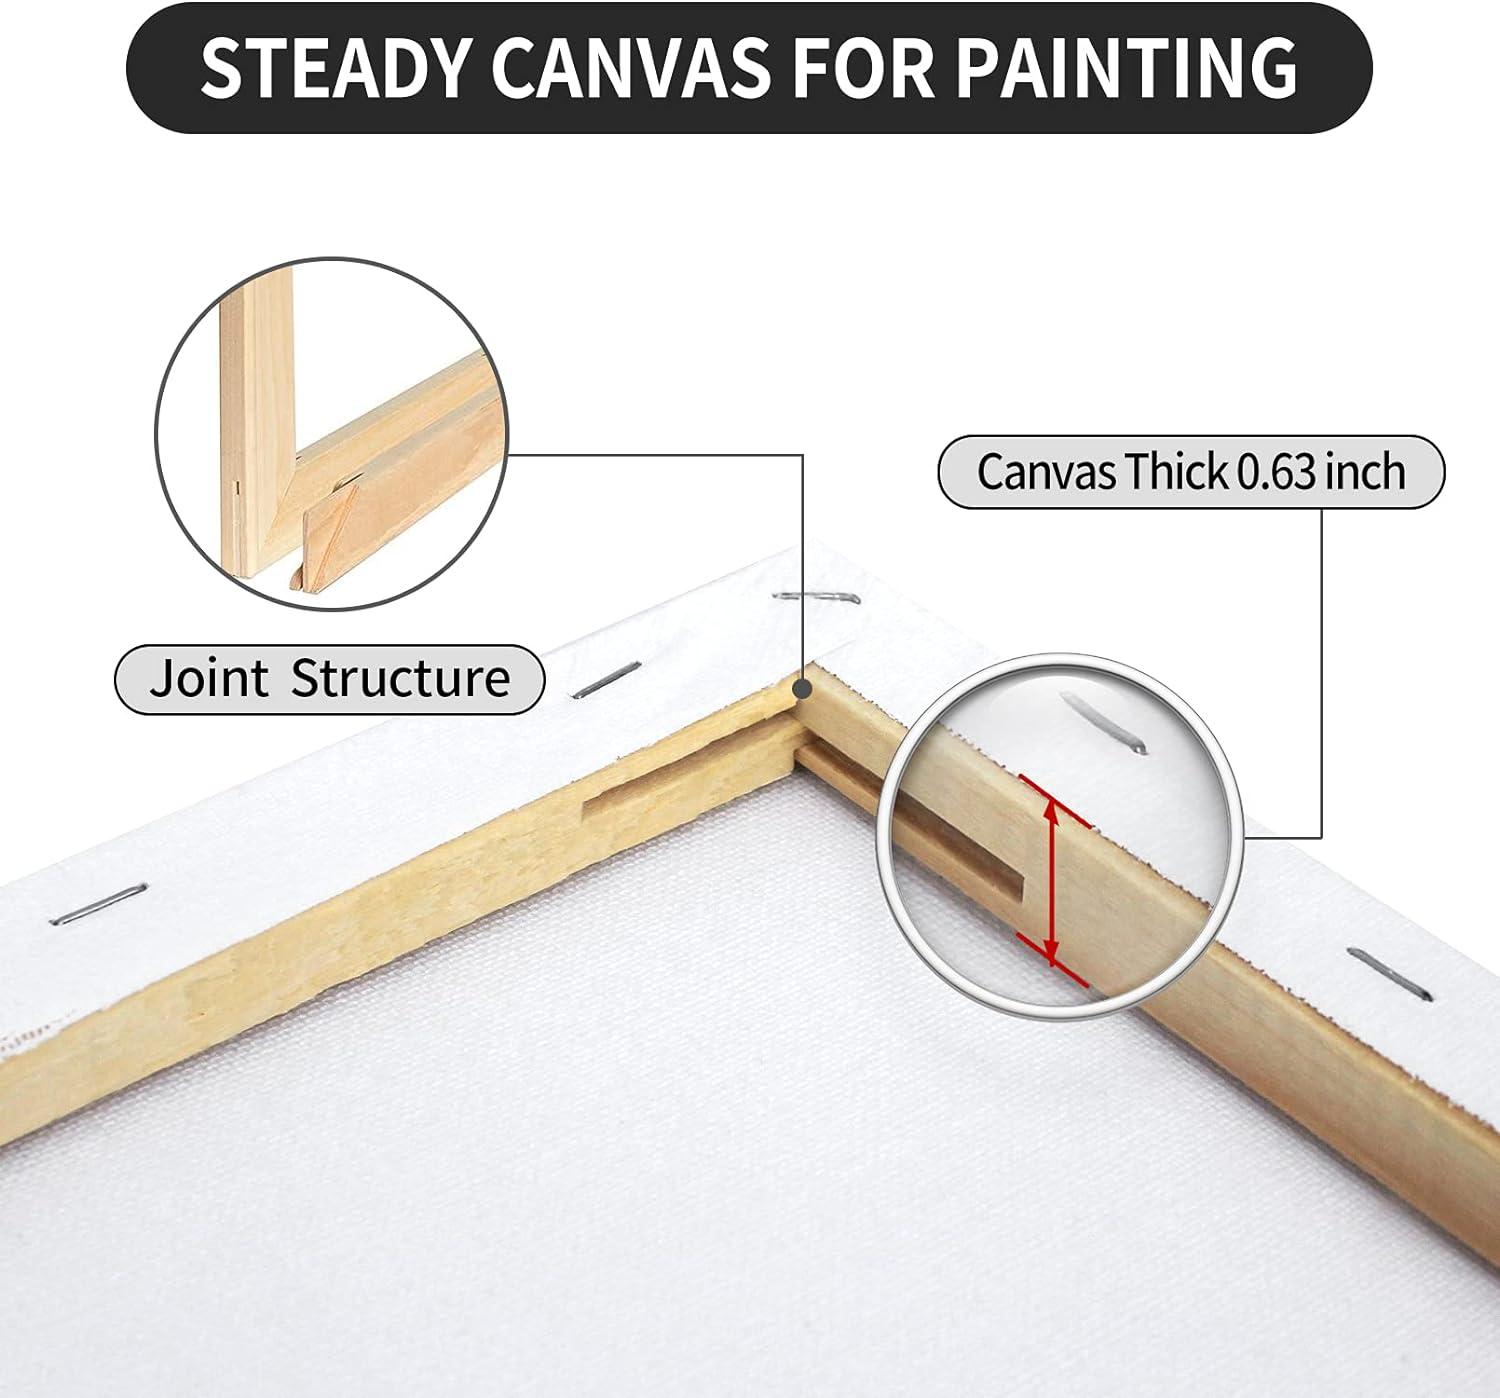 Blank Pre-Stretched Canvas CA